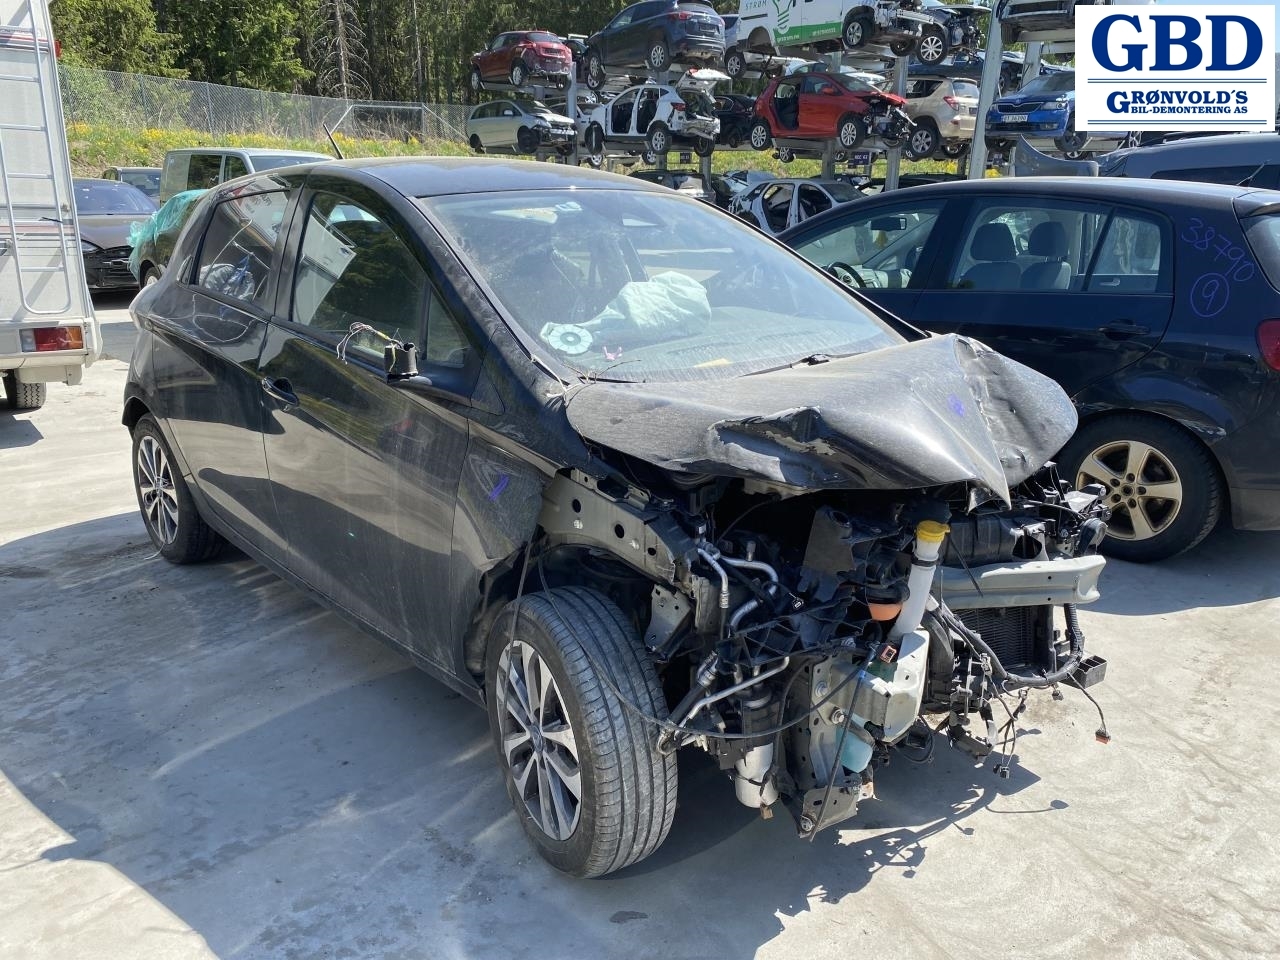 Renault Zoe, 2019- (Fase 2) parts car, Engine code: 5AQ-80, Gearbox code: 